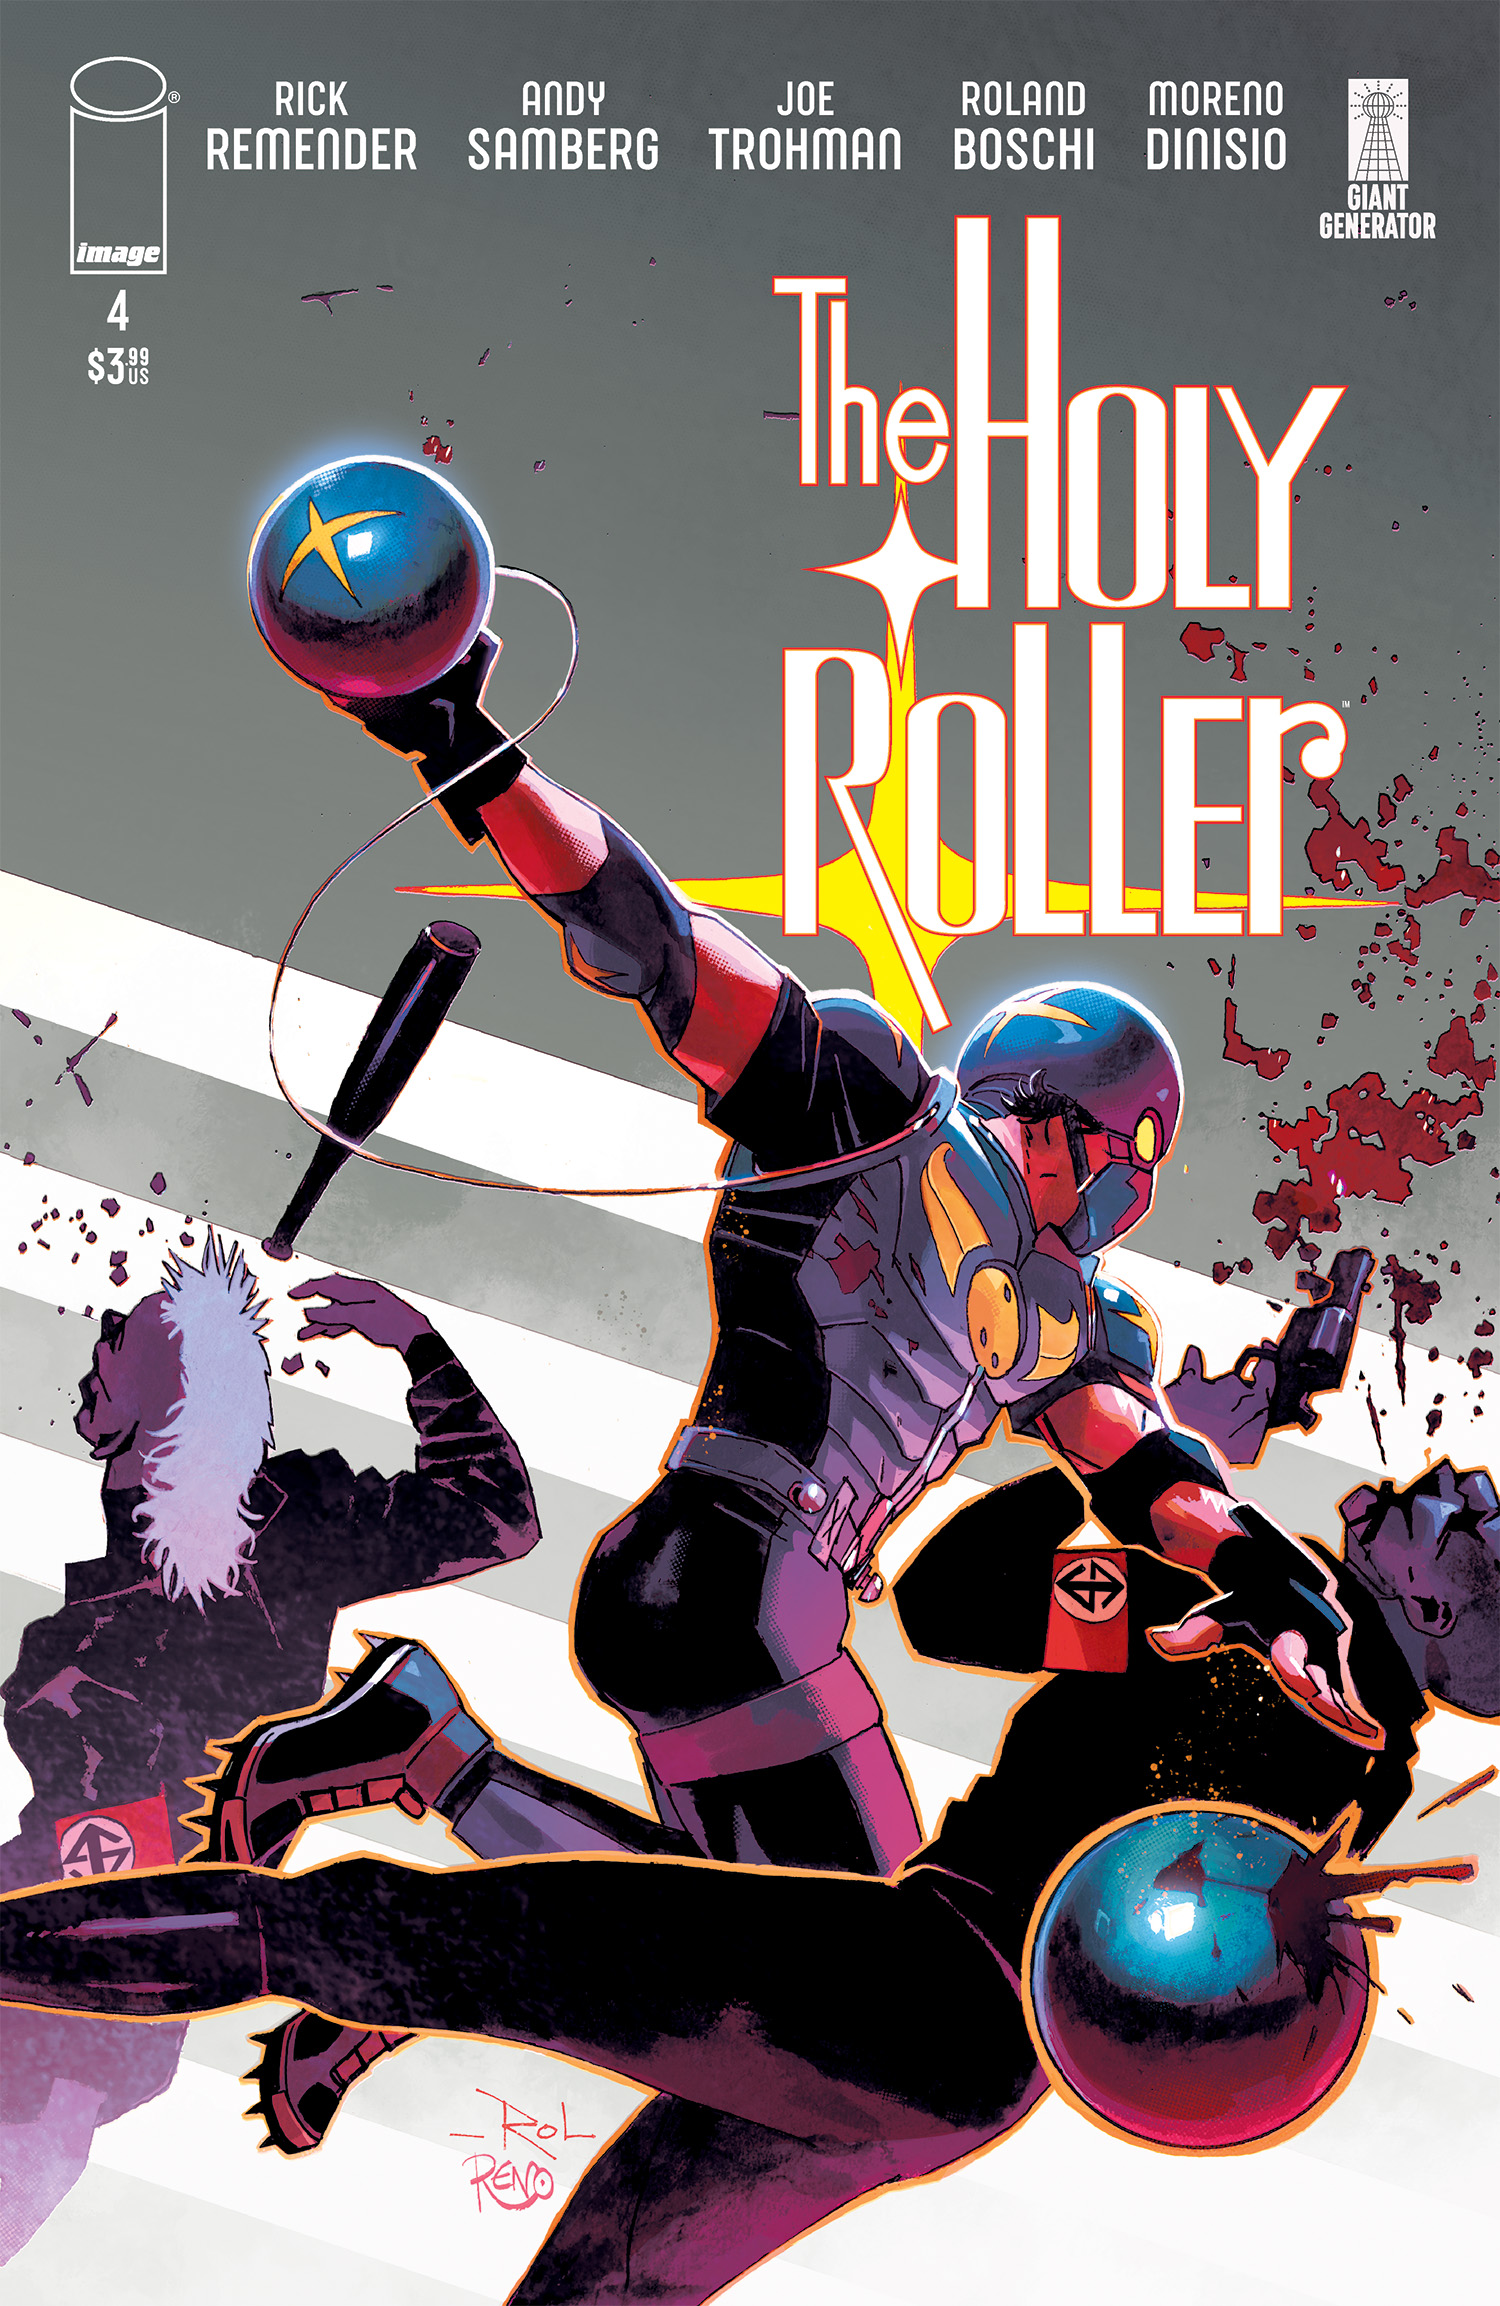 Holy Roller #4 (Of 10) Cover A Boschi & Dinisio